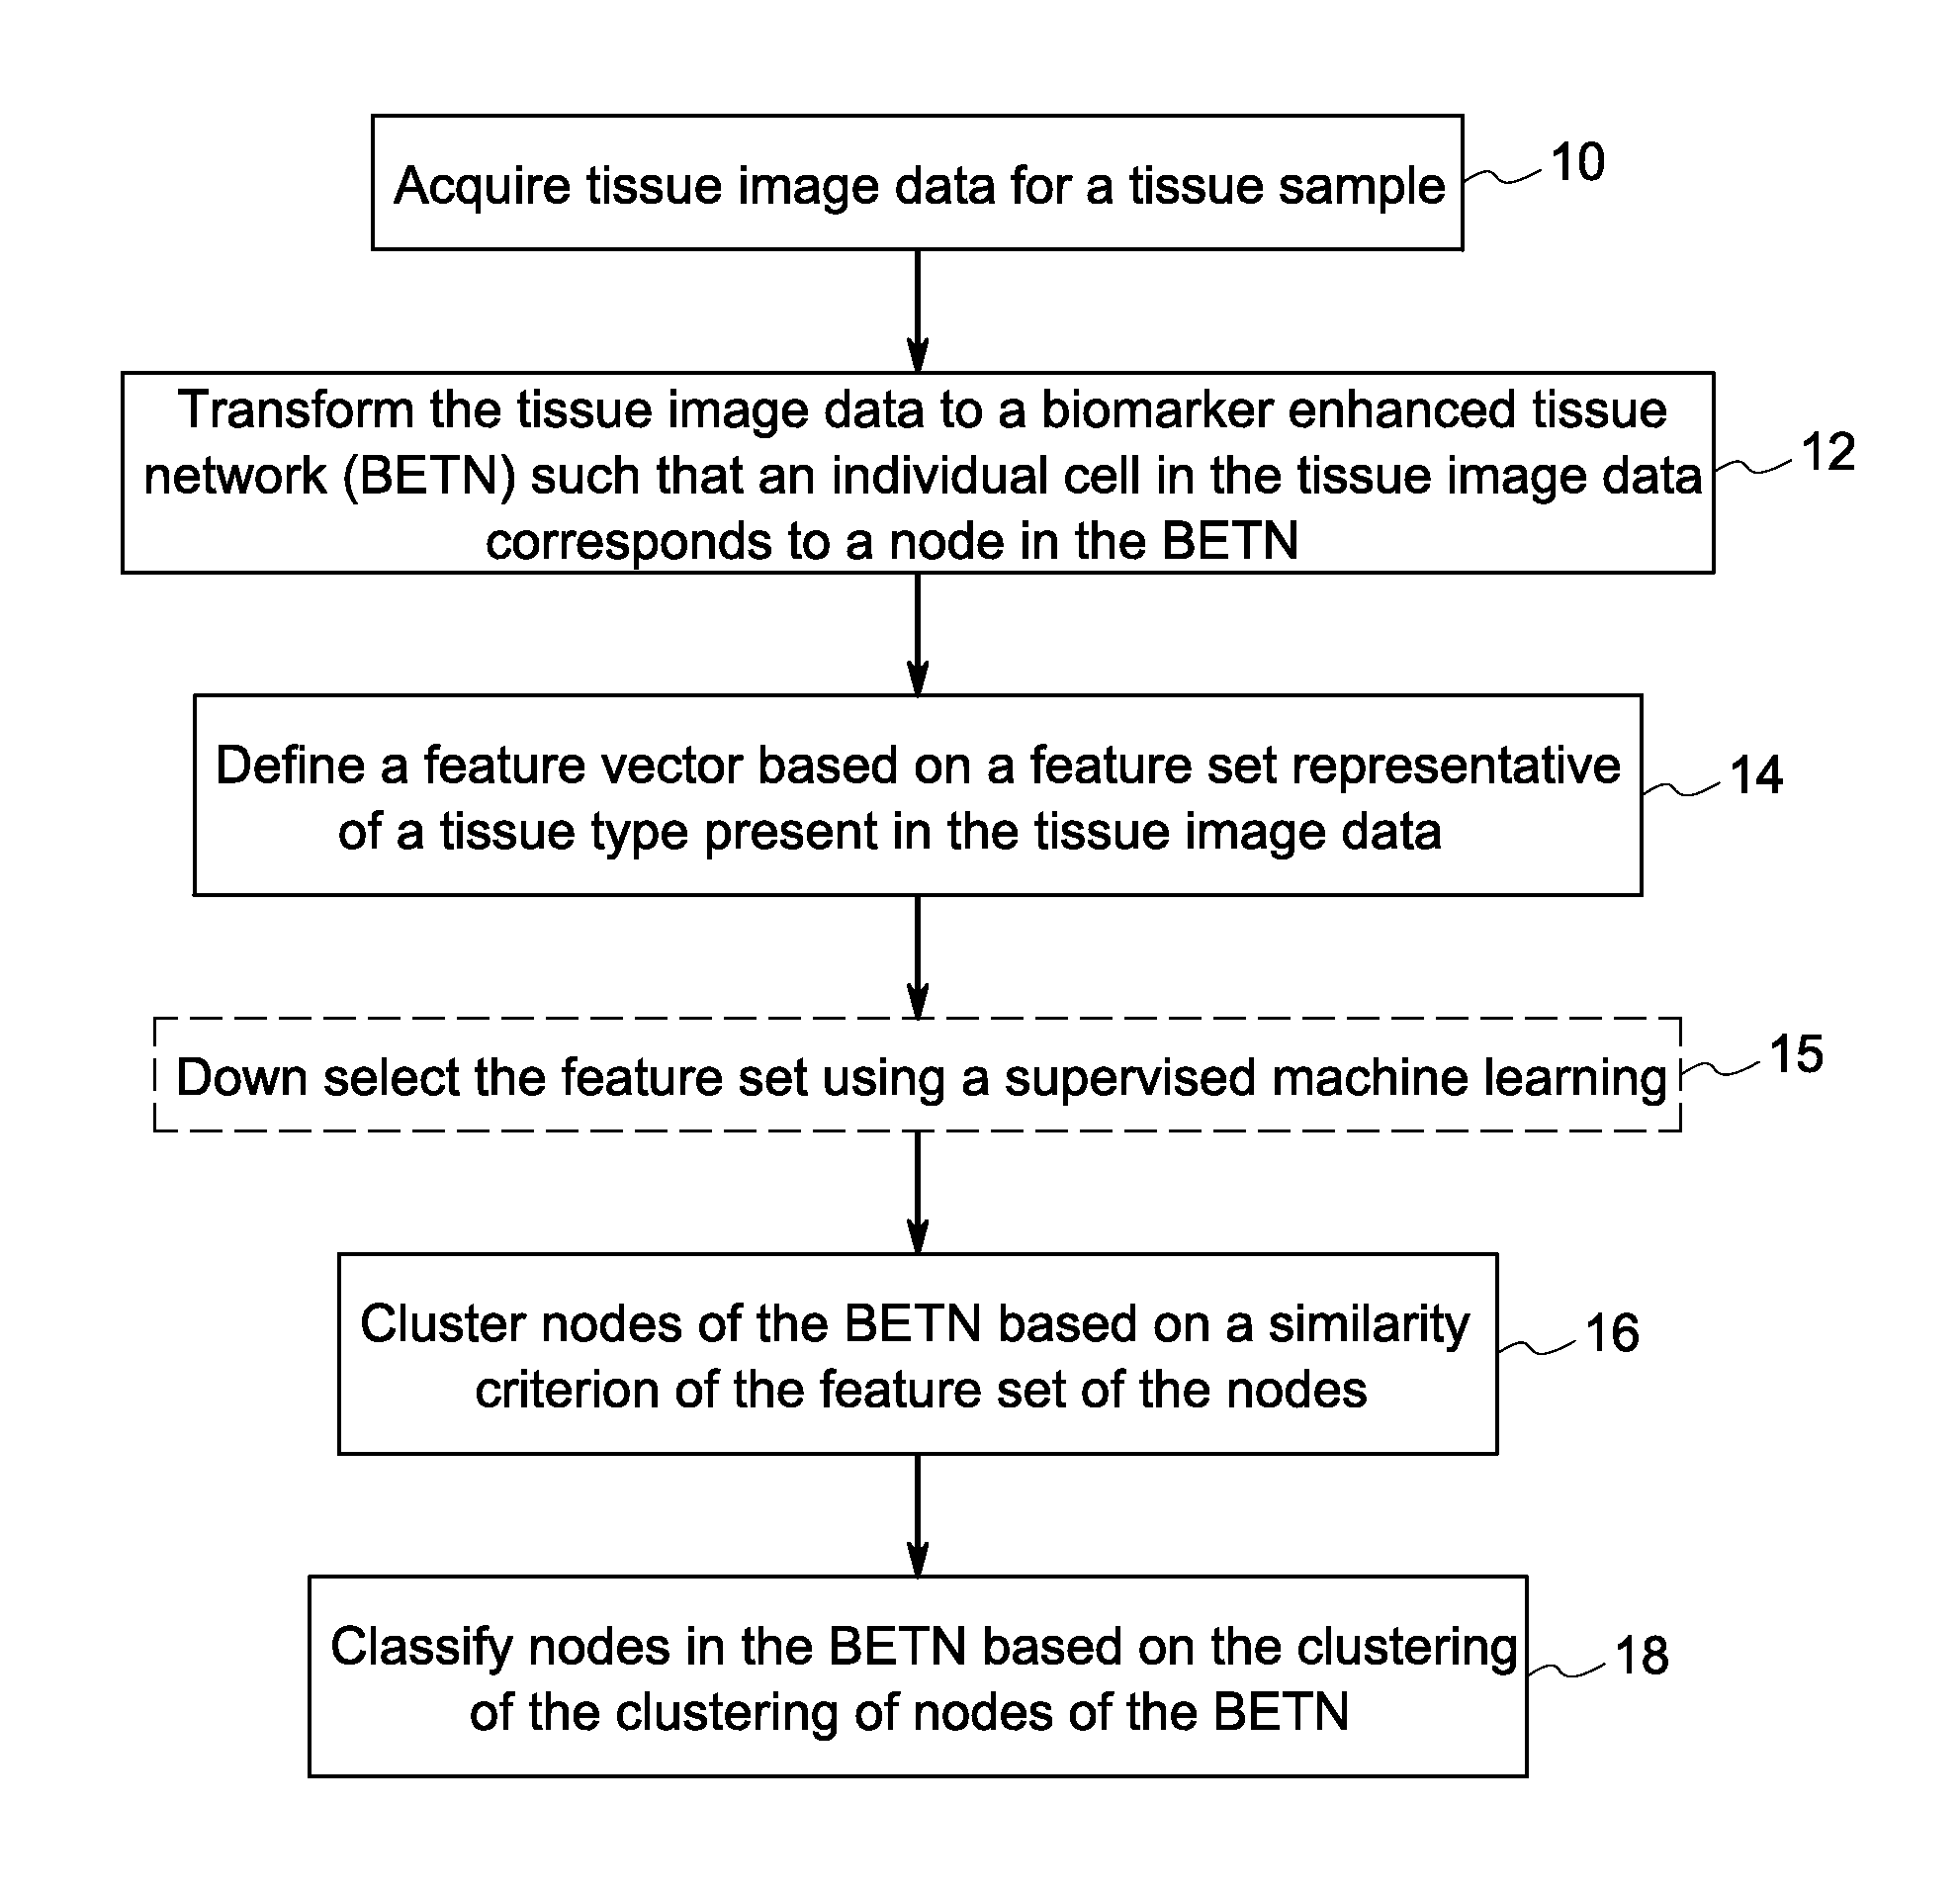 Systems and methods for tissue classification using attributes of a biomarker enhanced tissue network (BETN)